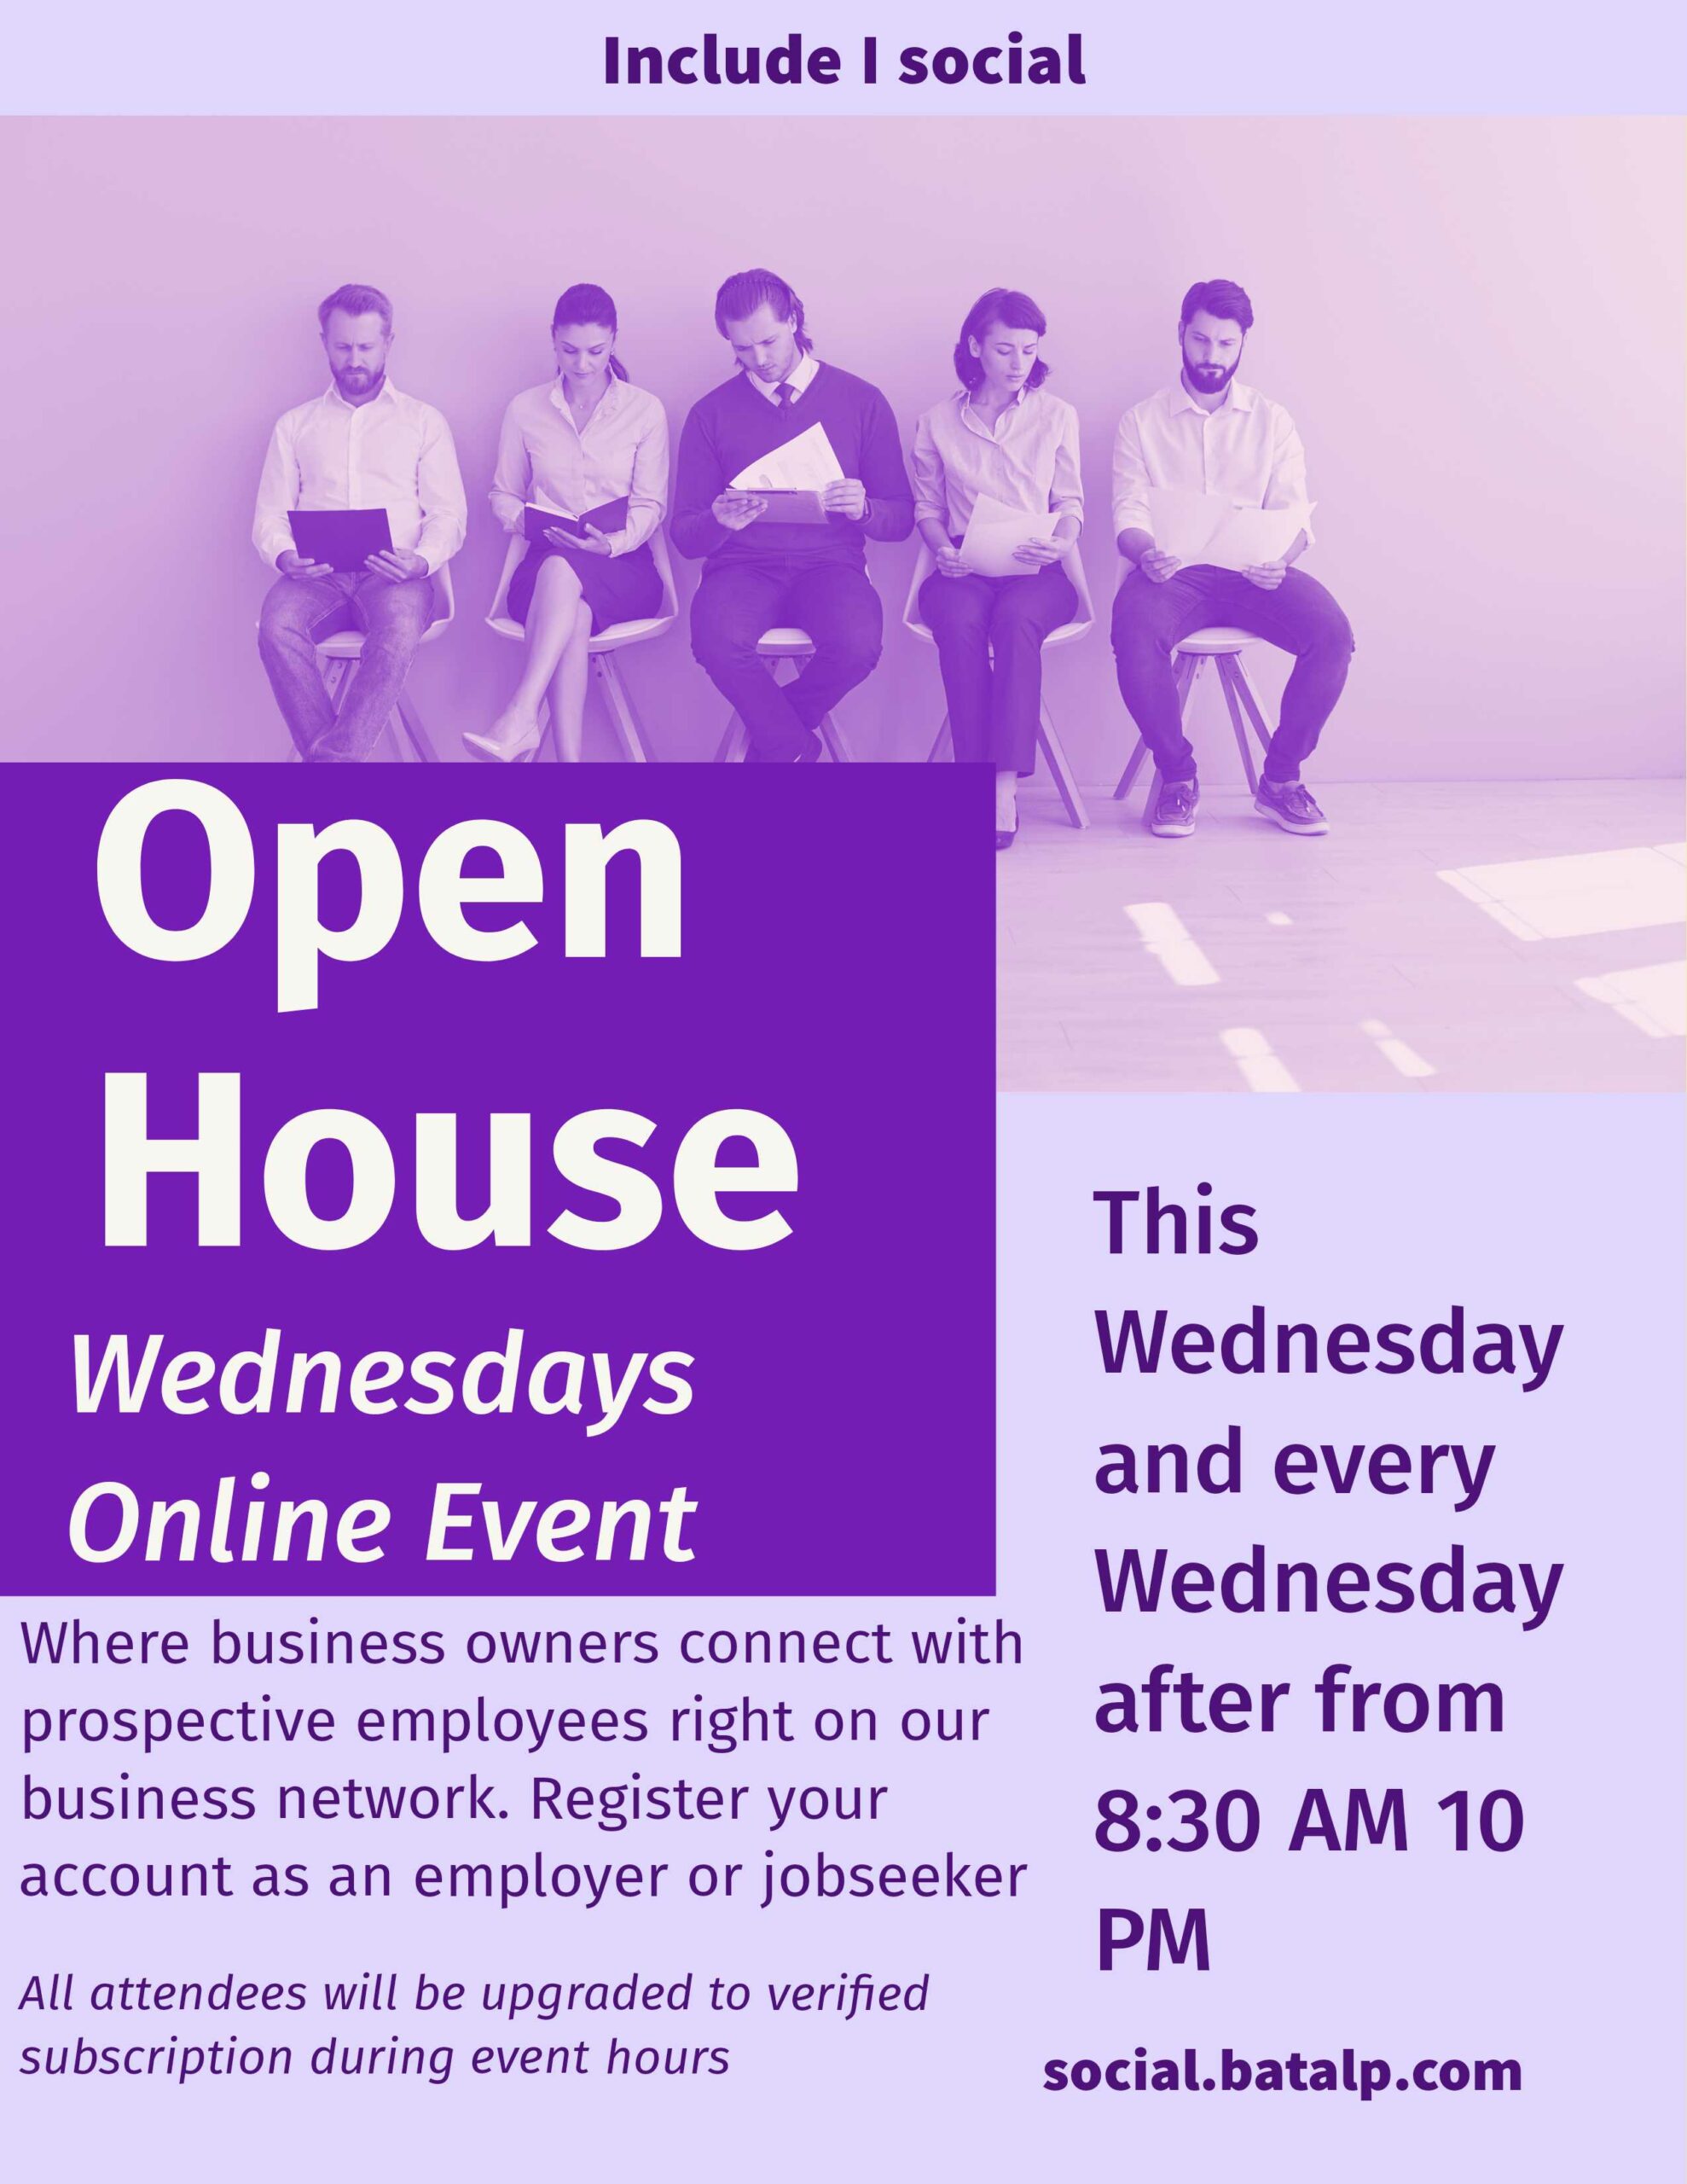 Open House Wednesday Online